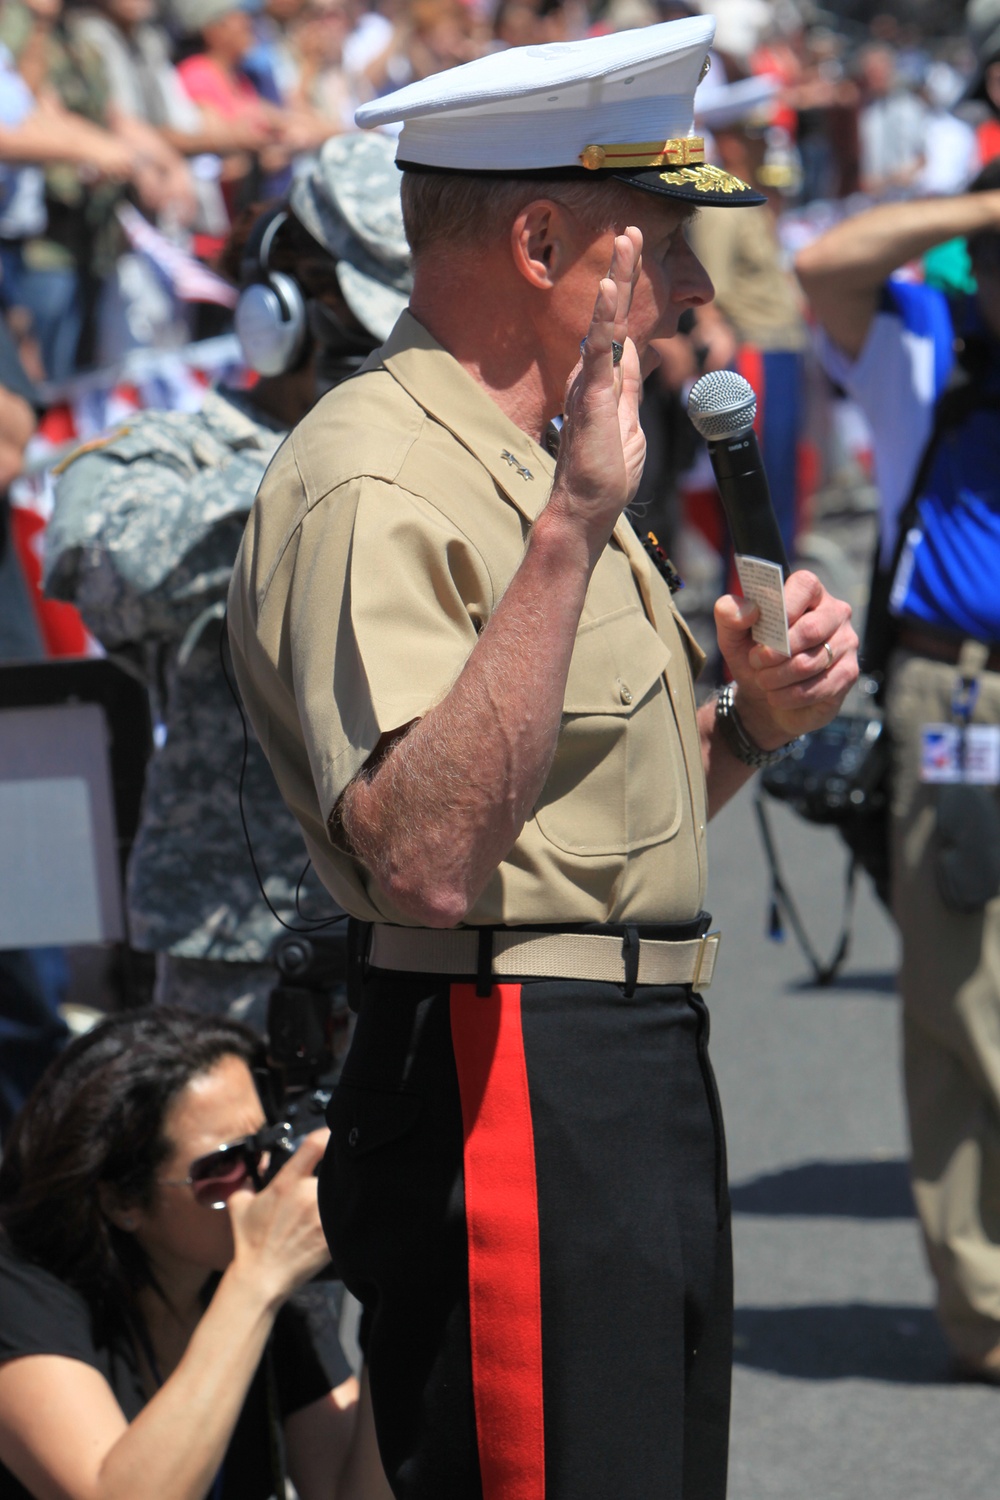 Military honored in Annual Armed Forces Day Parade